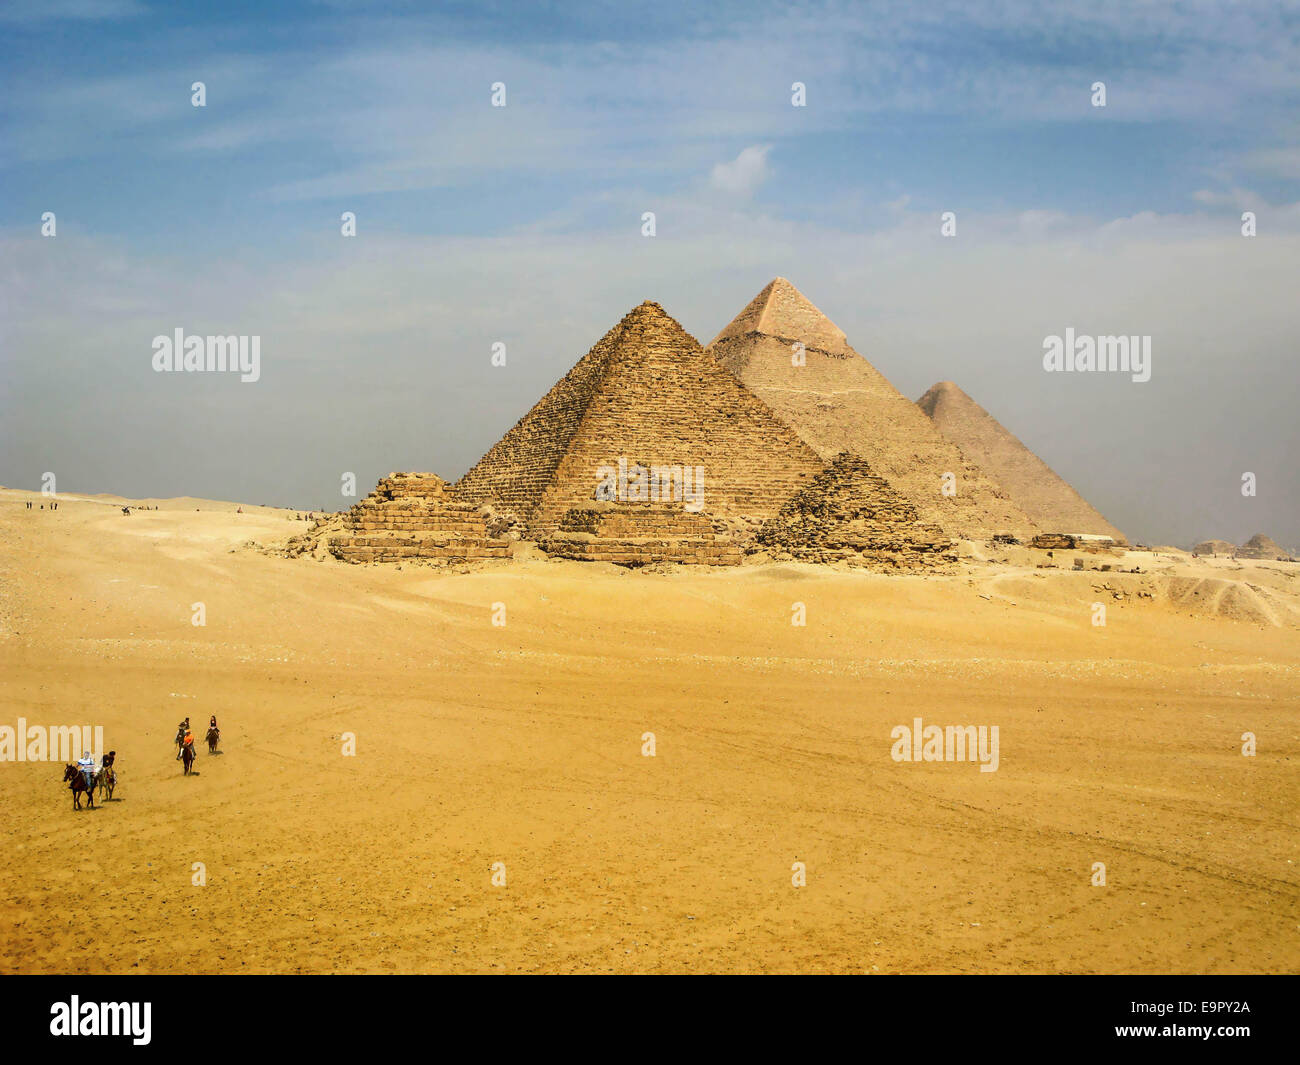 General view of the pyramids of Giza in Cairo, Egypt. Stock Photo